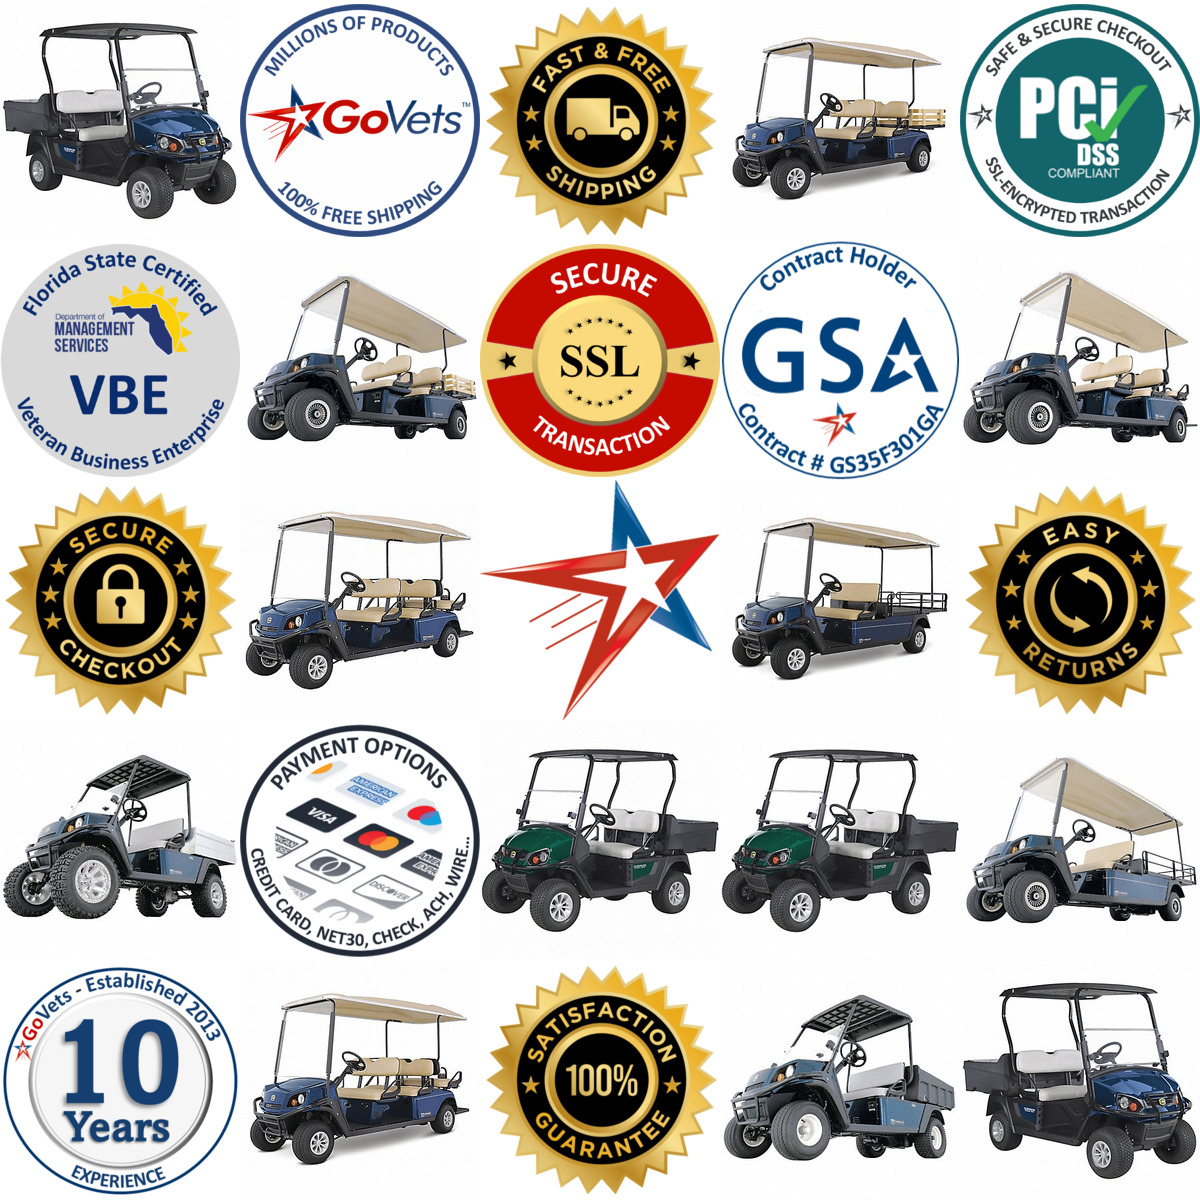 A selection of Personnel Transport and Utility Vehicles products on GoVets